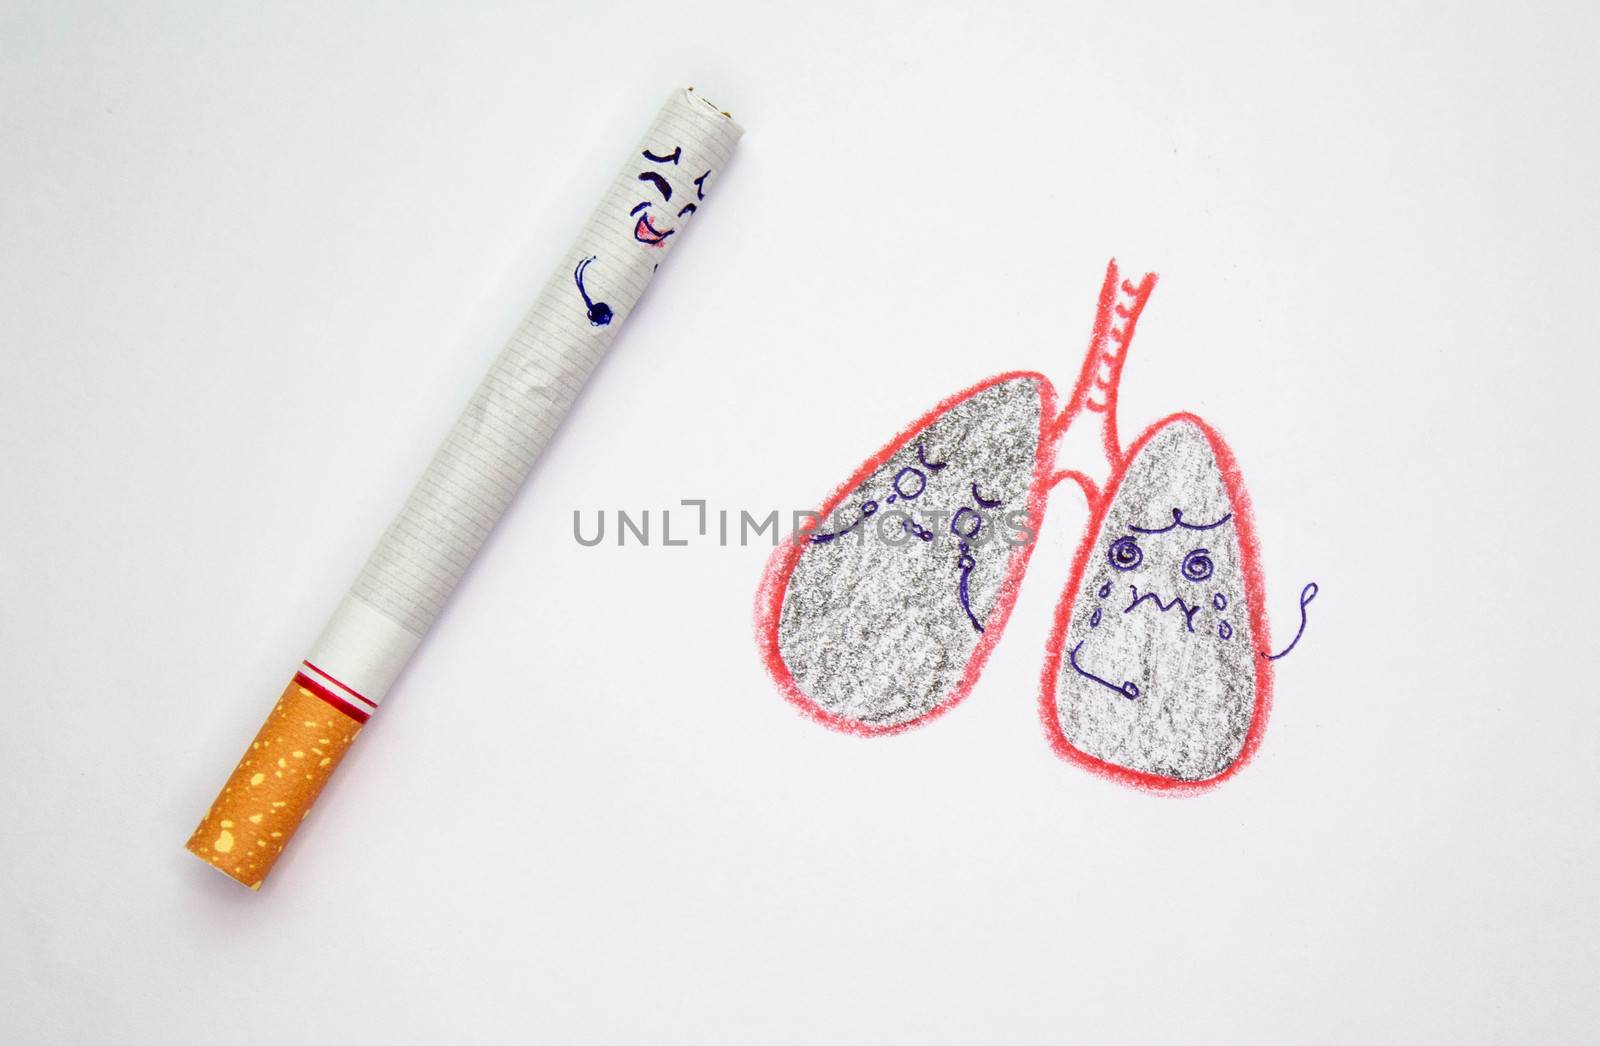 World No Tobacco Day; Smoking causes lung damage, isolated on white background. by TEERASAK